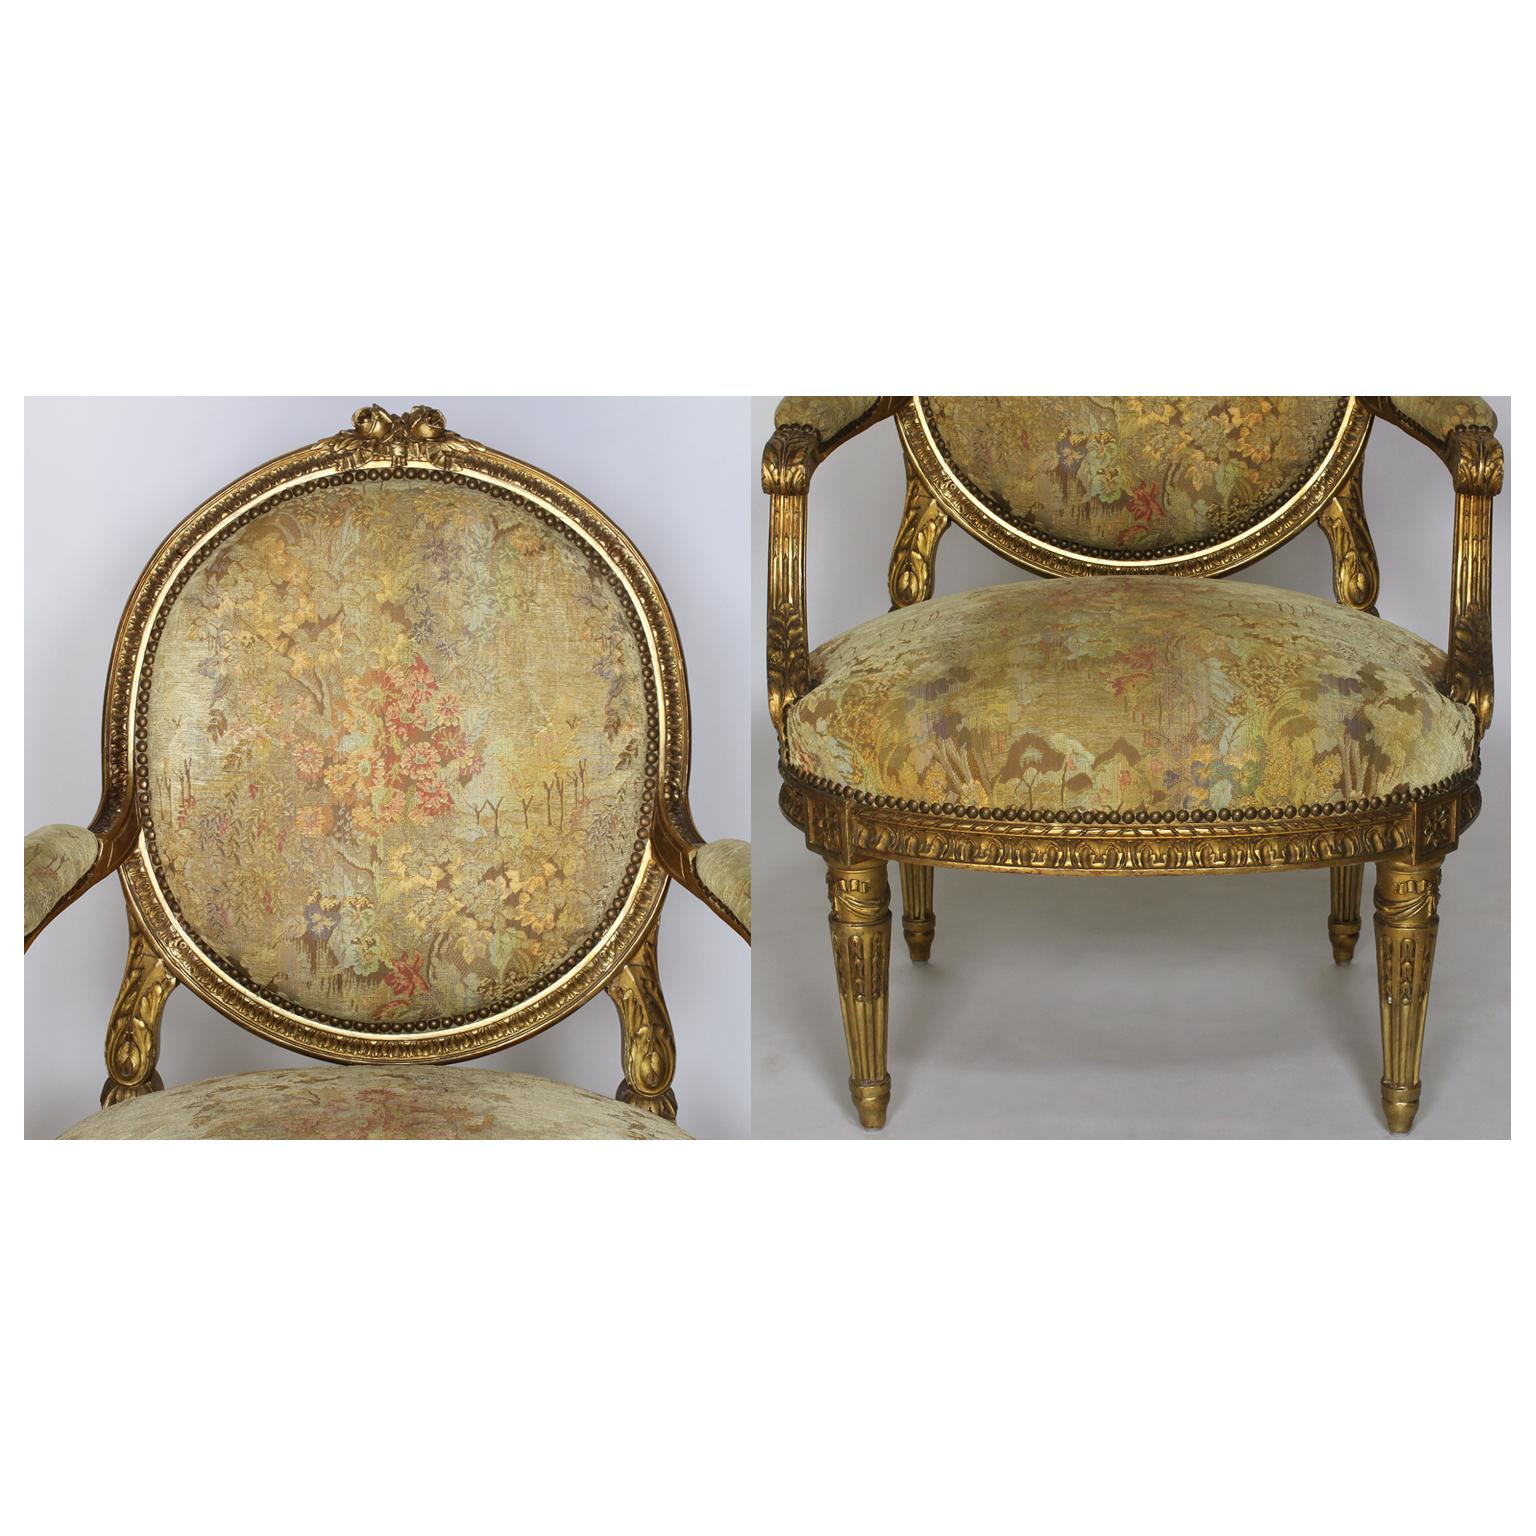 Fine French 19th Century Louis XVI Style Giltwood Carved Five-Piece Salon Suite For Sale 13